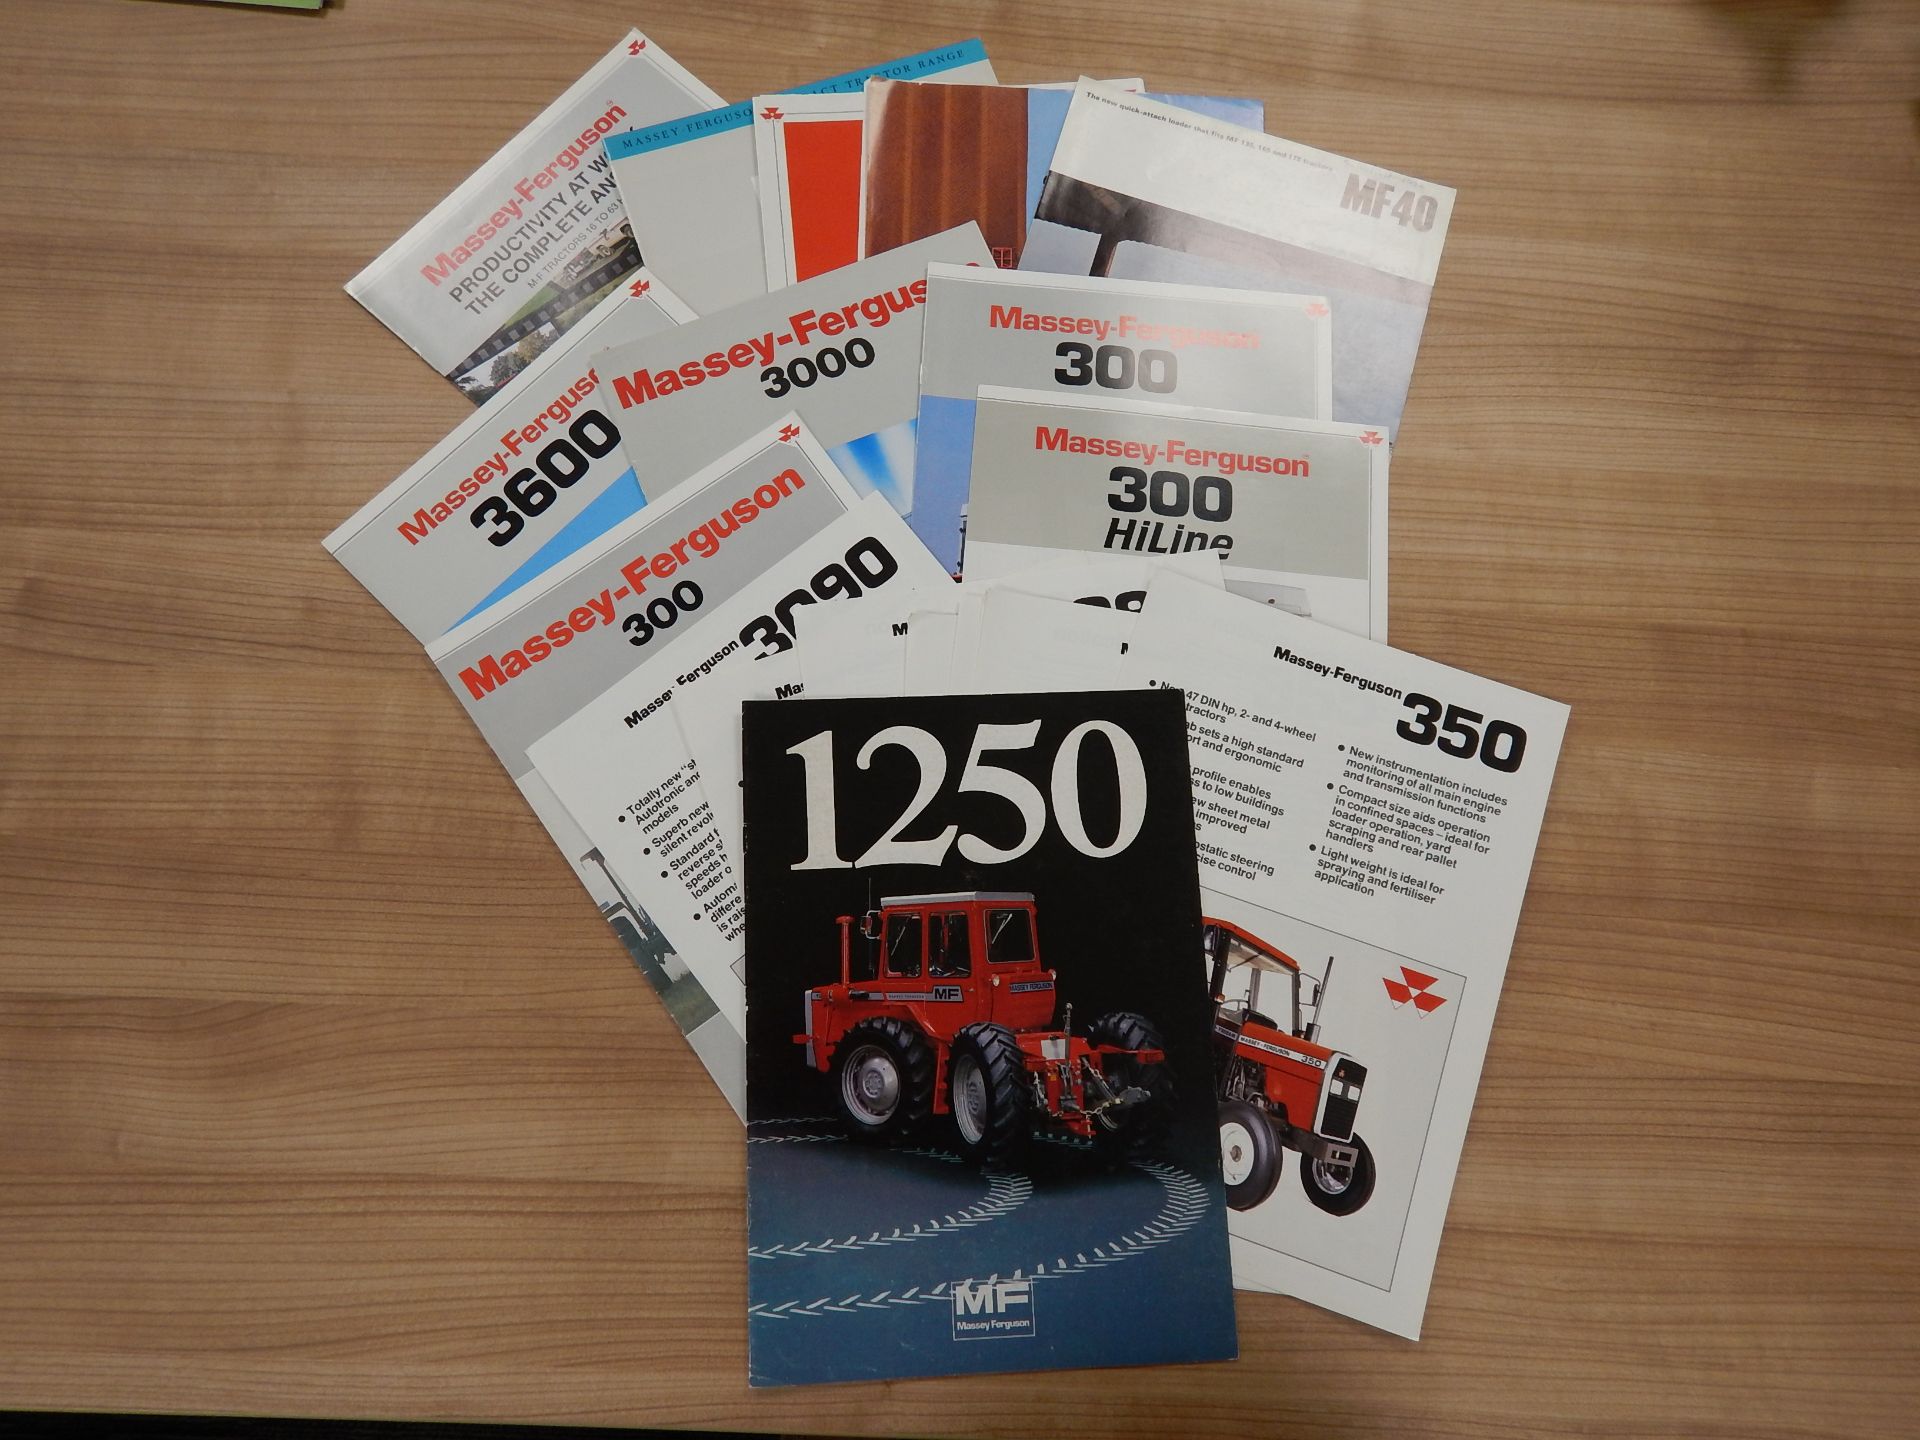 Qty Massey Ferguson colour brochures to include: 1250, 300 and 3000 range etc.